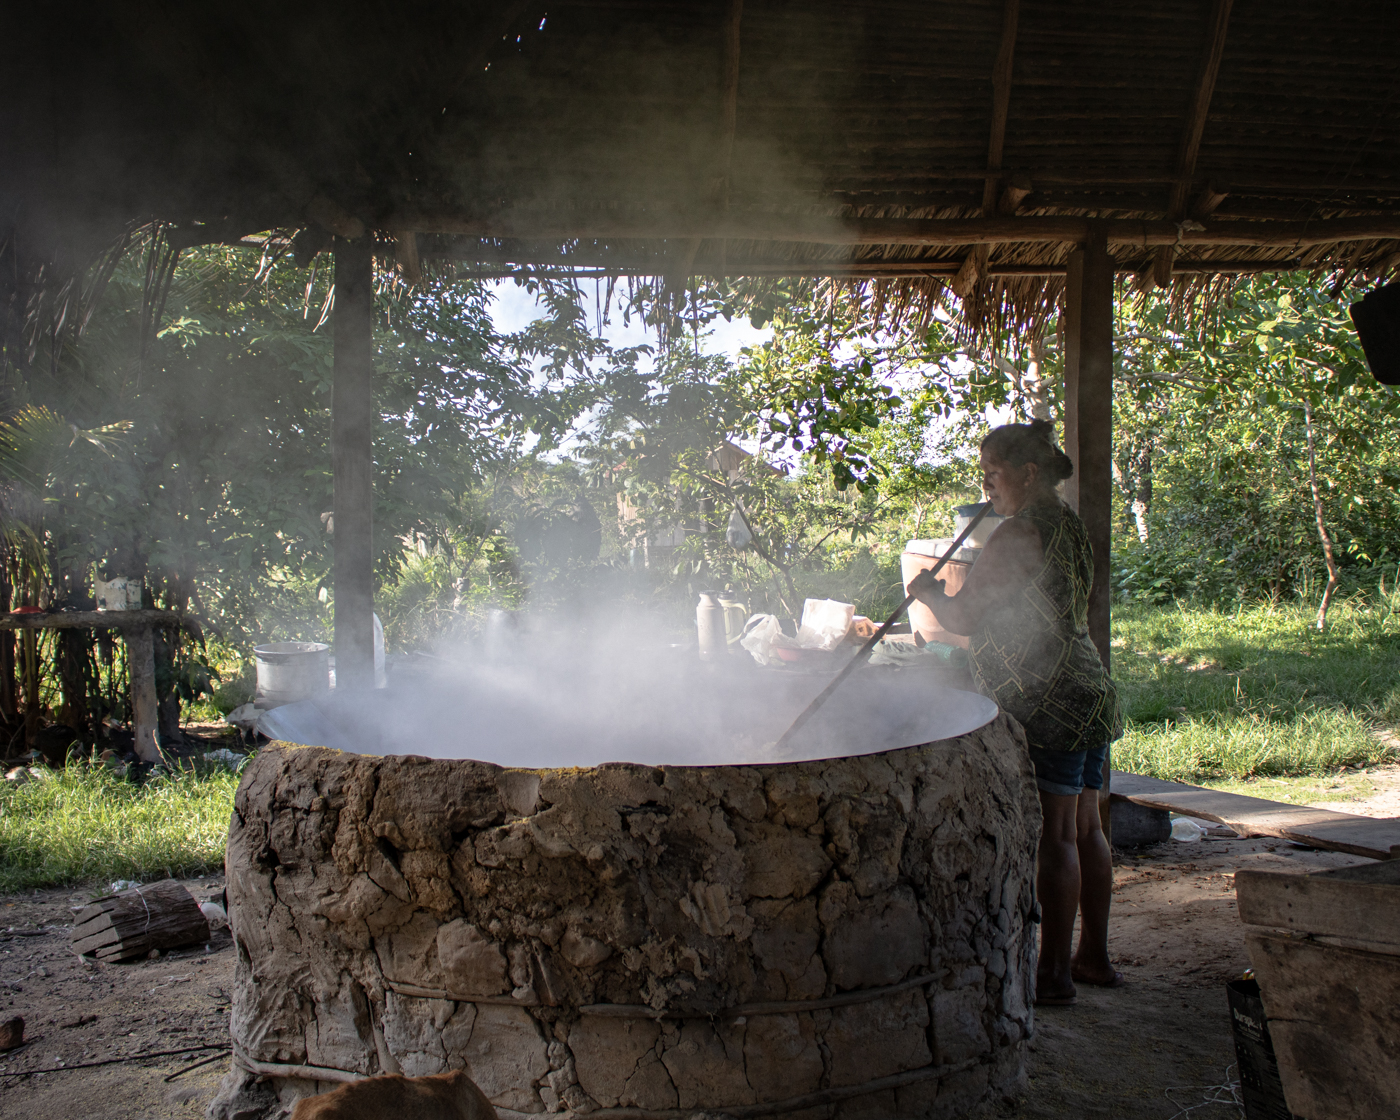 Maria Loreta Pascoal’s sister toasts cassava flour. A study developed by World Resources Institute (WRI) Brazil found that adopting bioeconomic models that replicate productive arrangements already existing within Indigenous communities could increase the region’s GDP by $8 billion and create 312,000 new jobs.